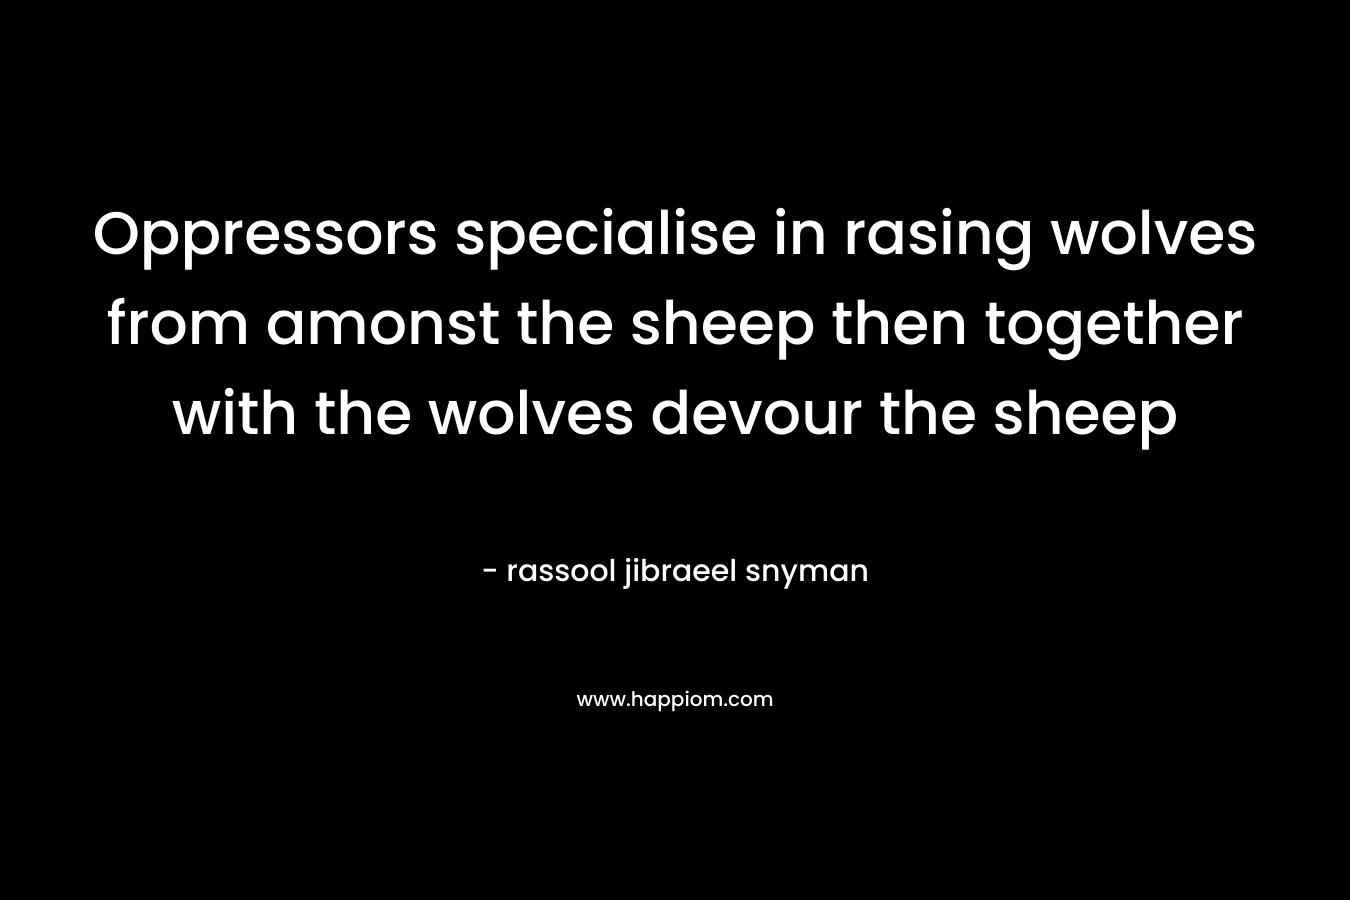 Oppressors specialise in rasing wolves from amonst the sheep then together with the wolves devour the sheep